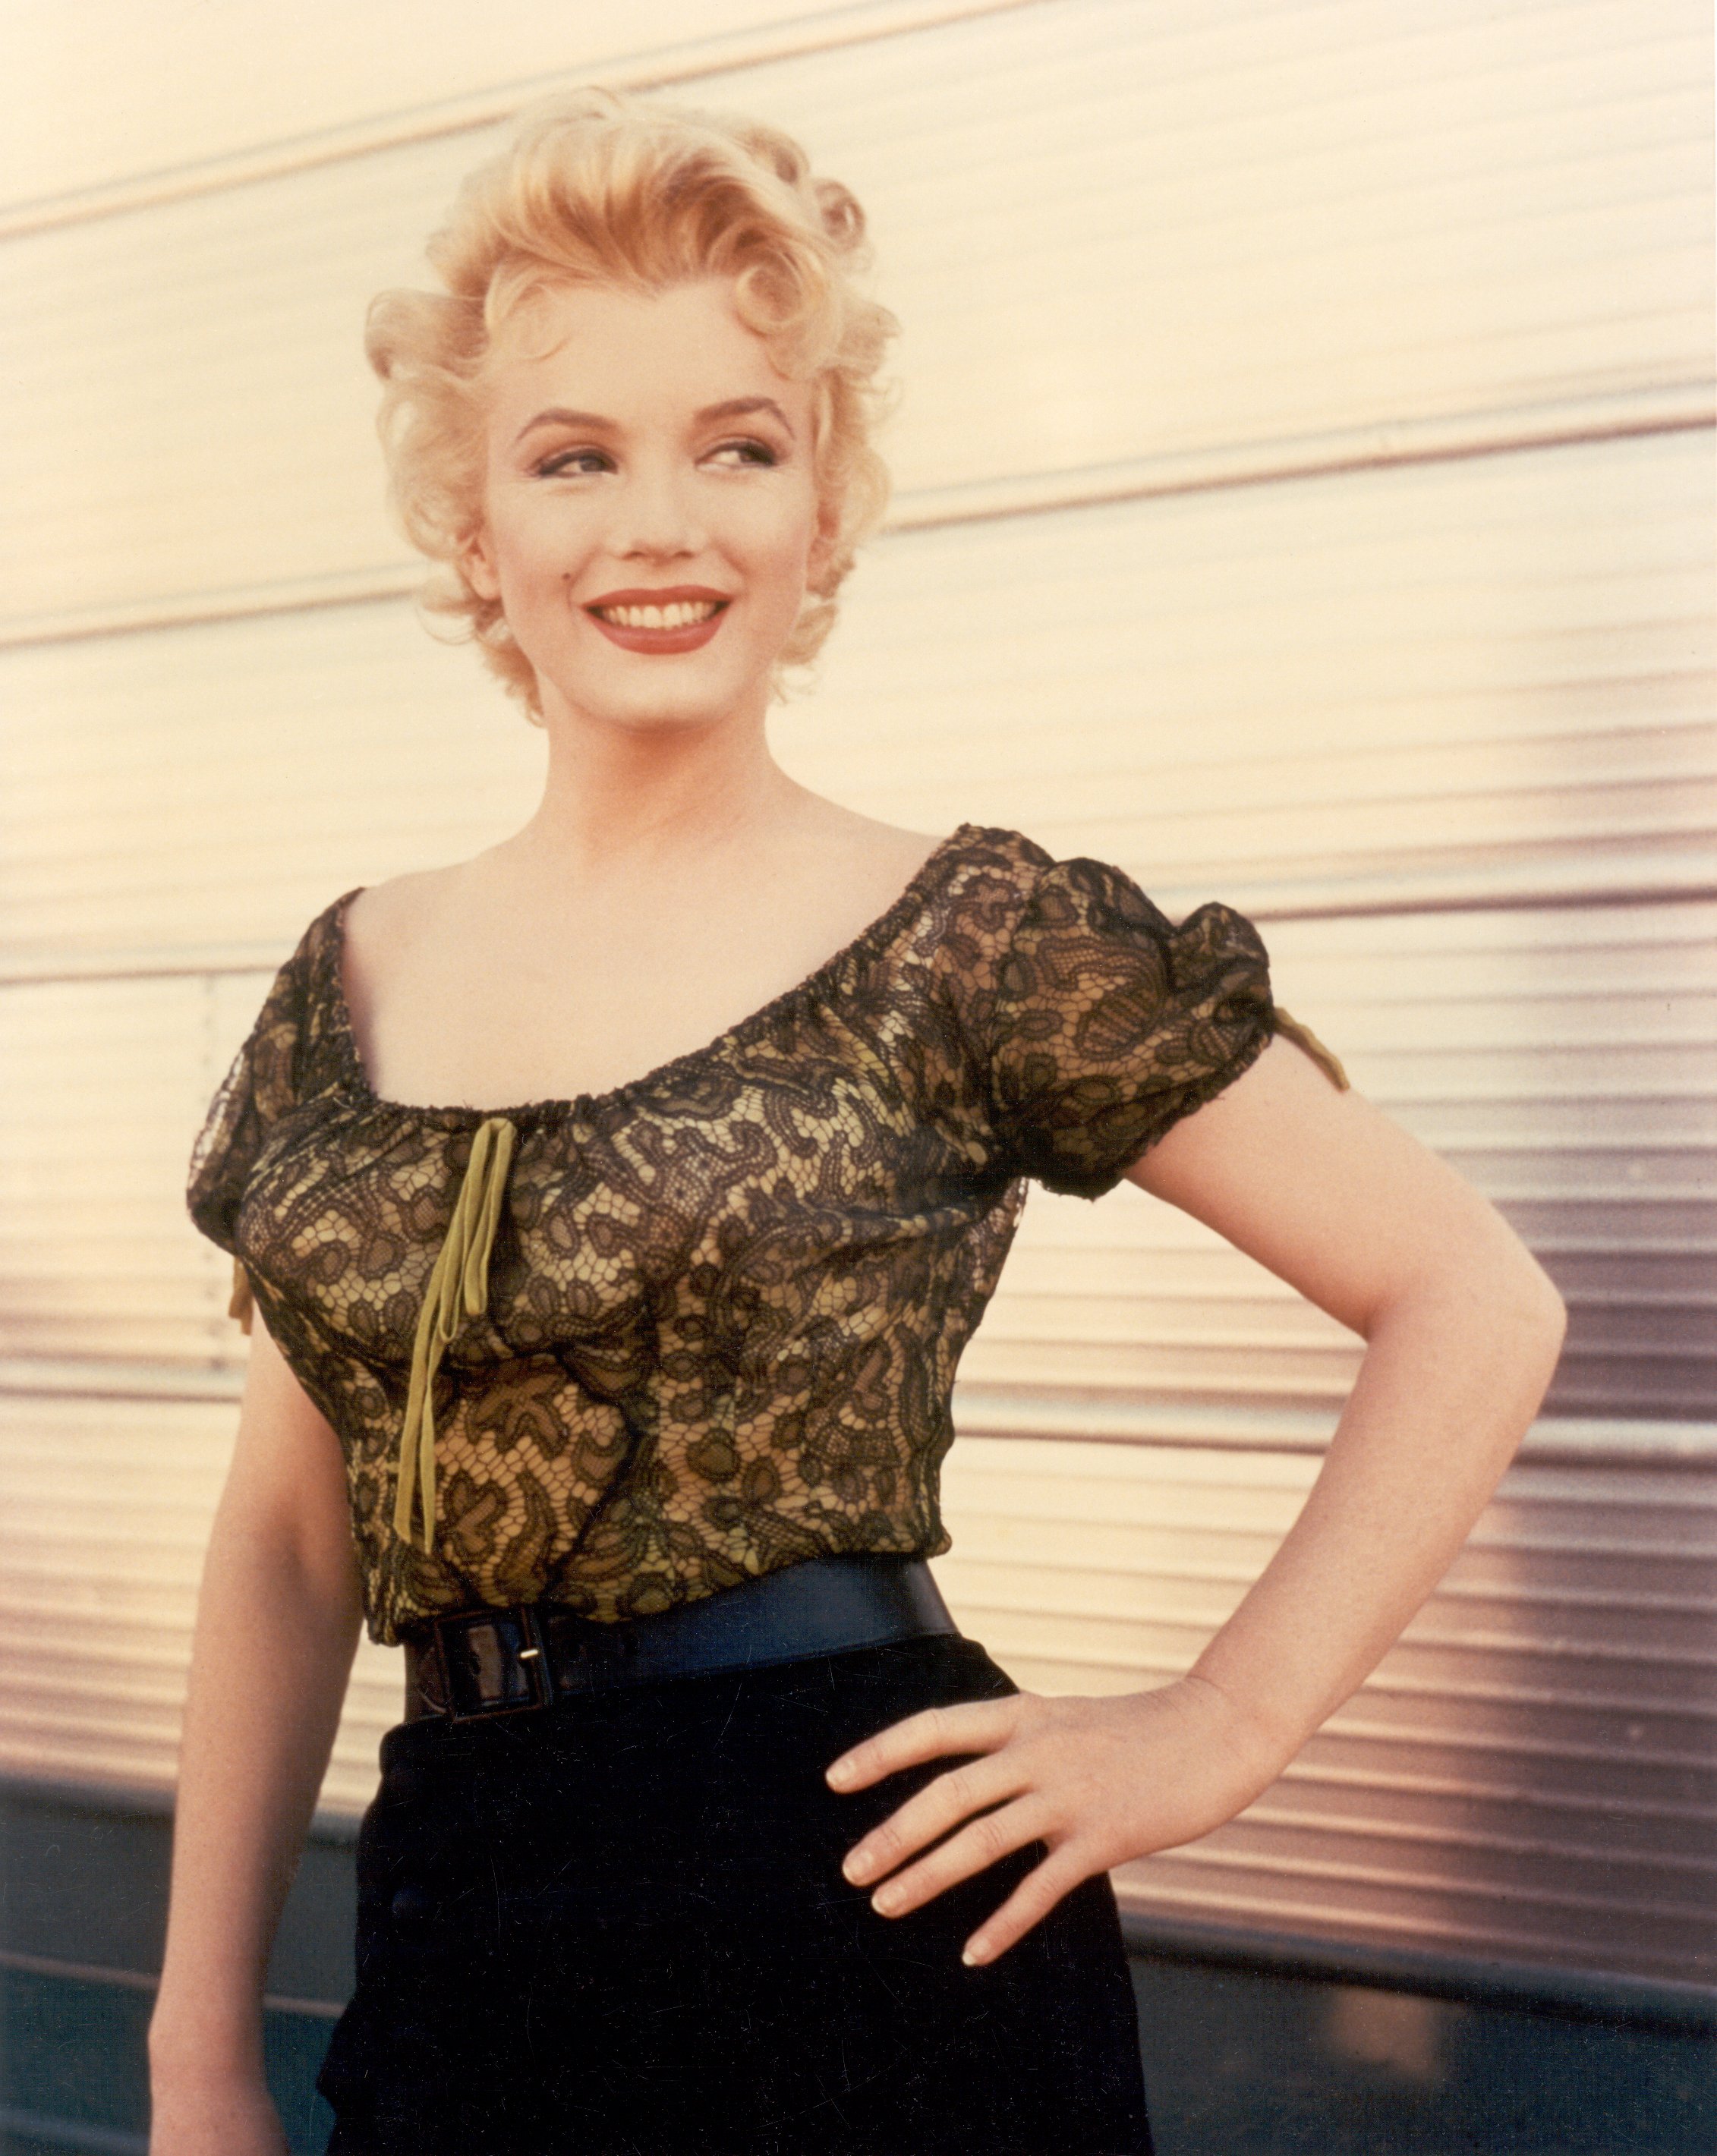 Actress Marilyn Monroe in a scene from 'Bus Stop' in 1956.| Source: Getty Images